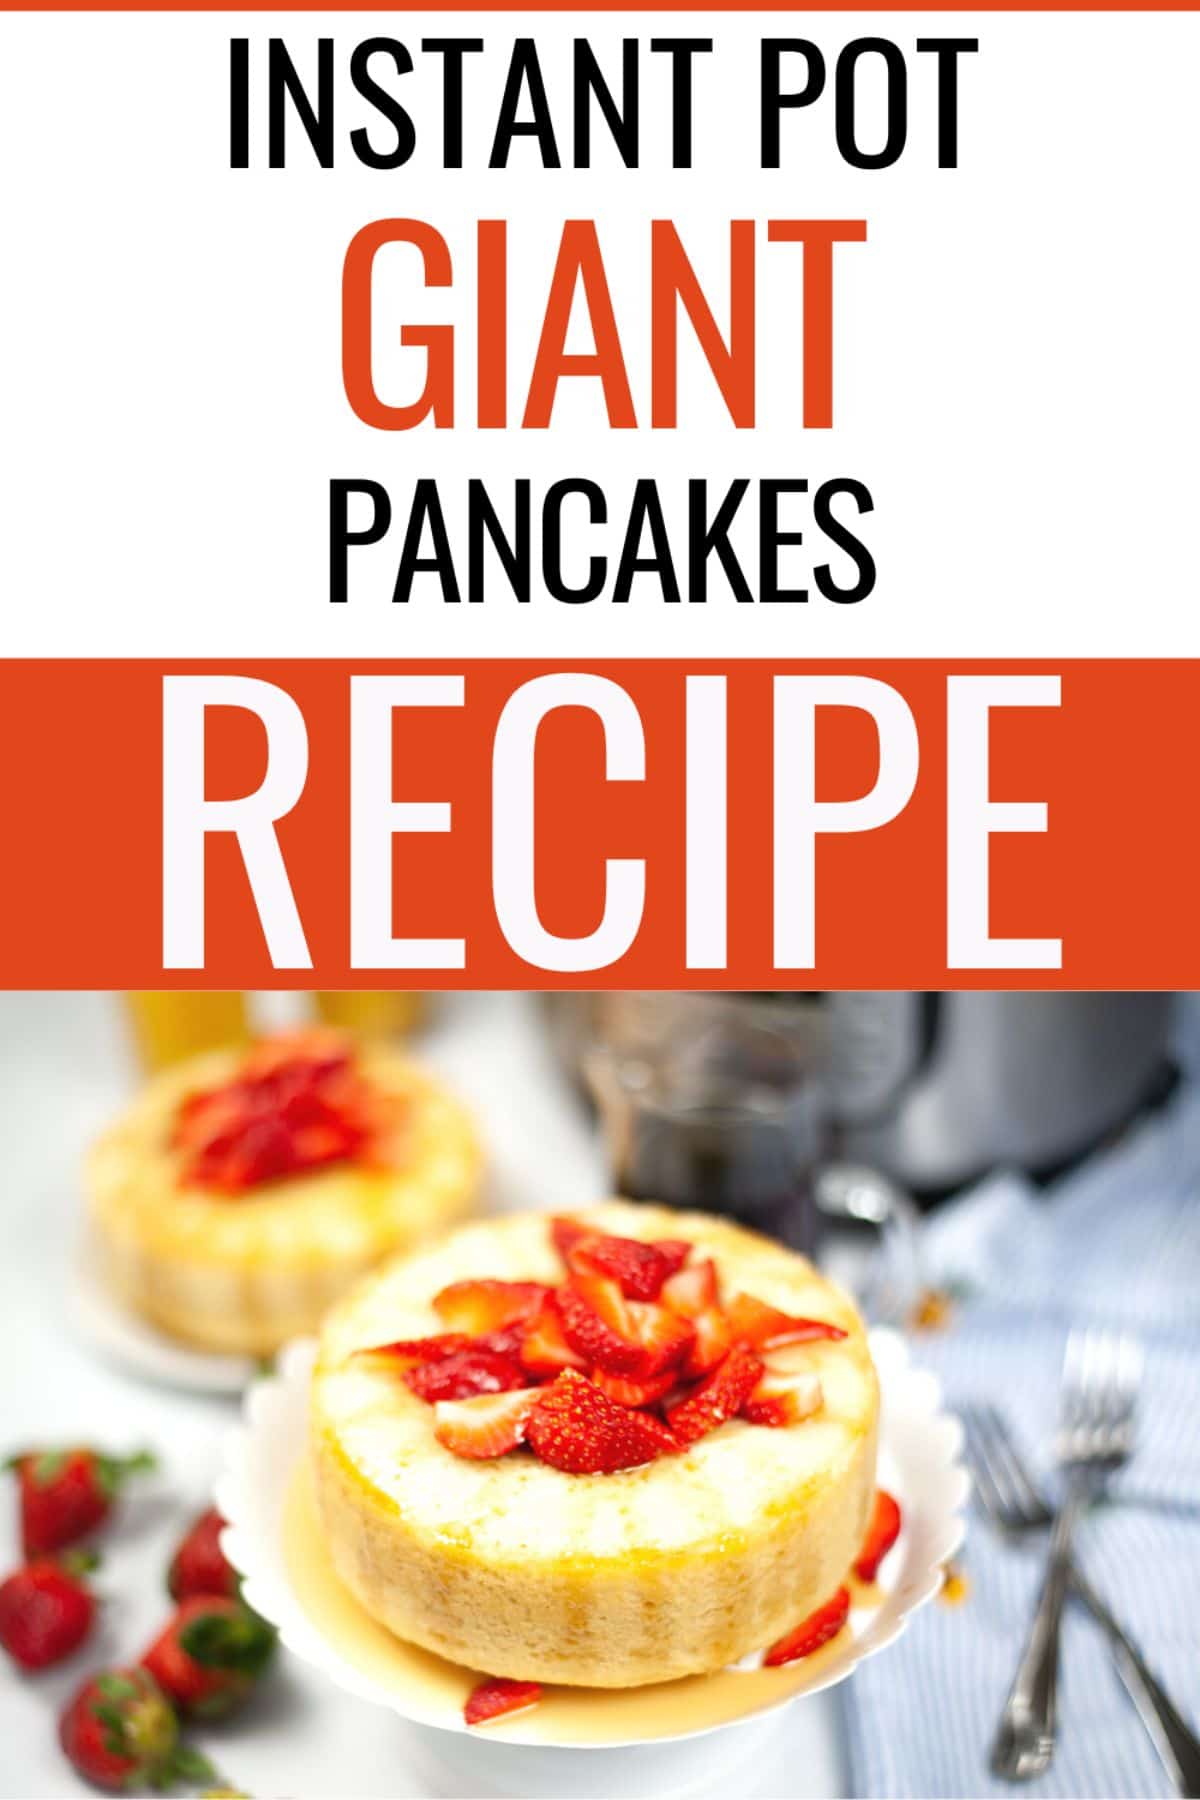 Giant Instant Pot Pancake topped with sliced Strawberries with a text at the upper half of the image reading Instant Pot Giant Pancakes Recipe